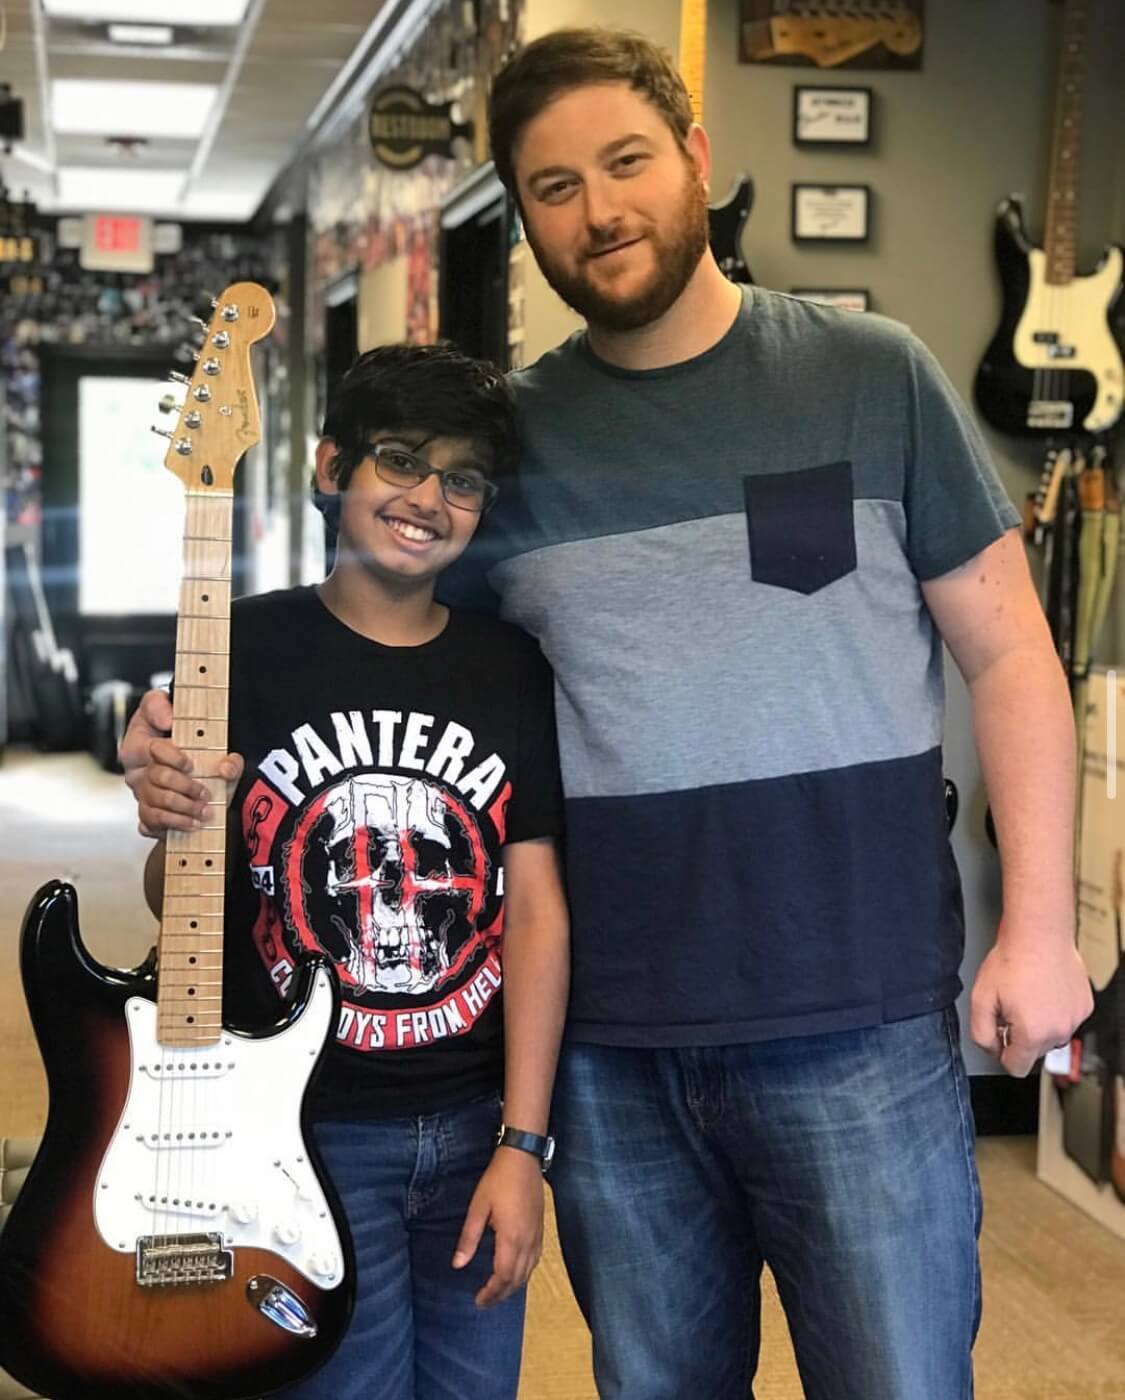 Adam and a student show off his sweet new Fender guitar.